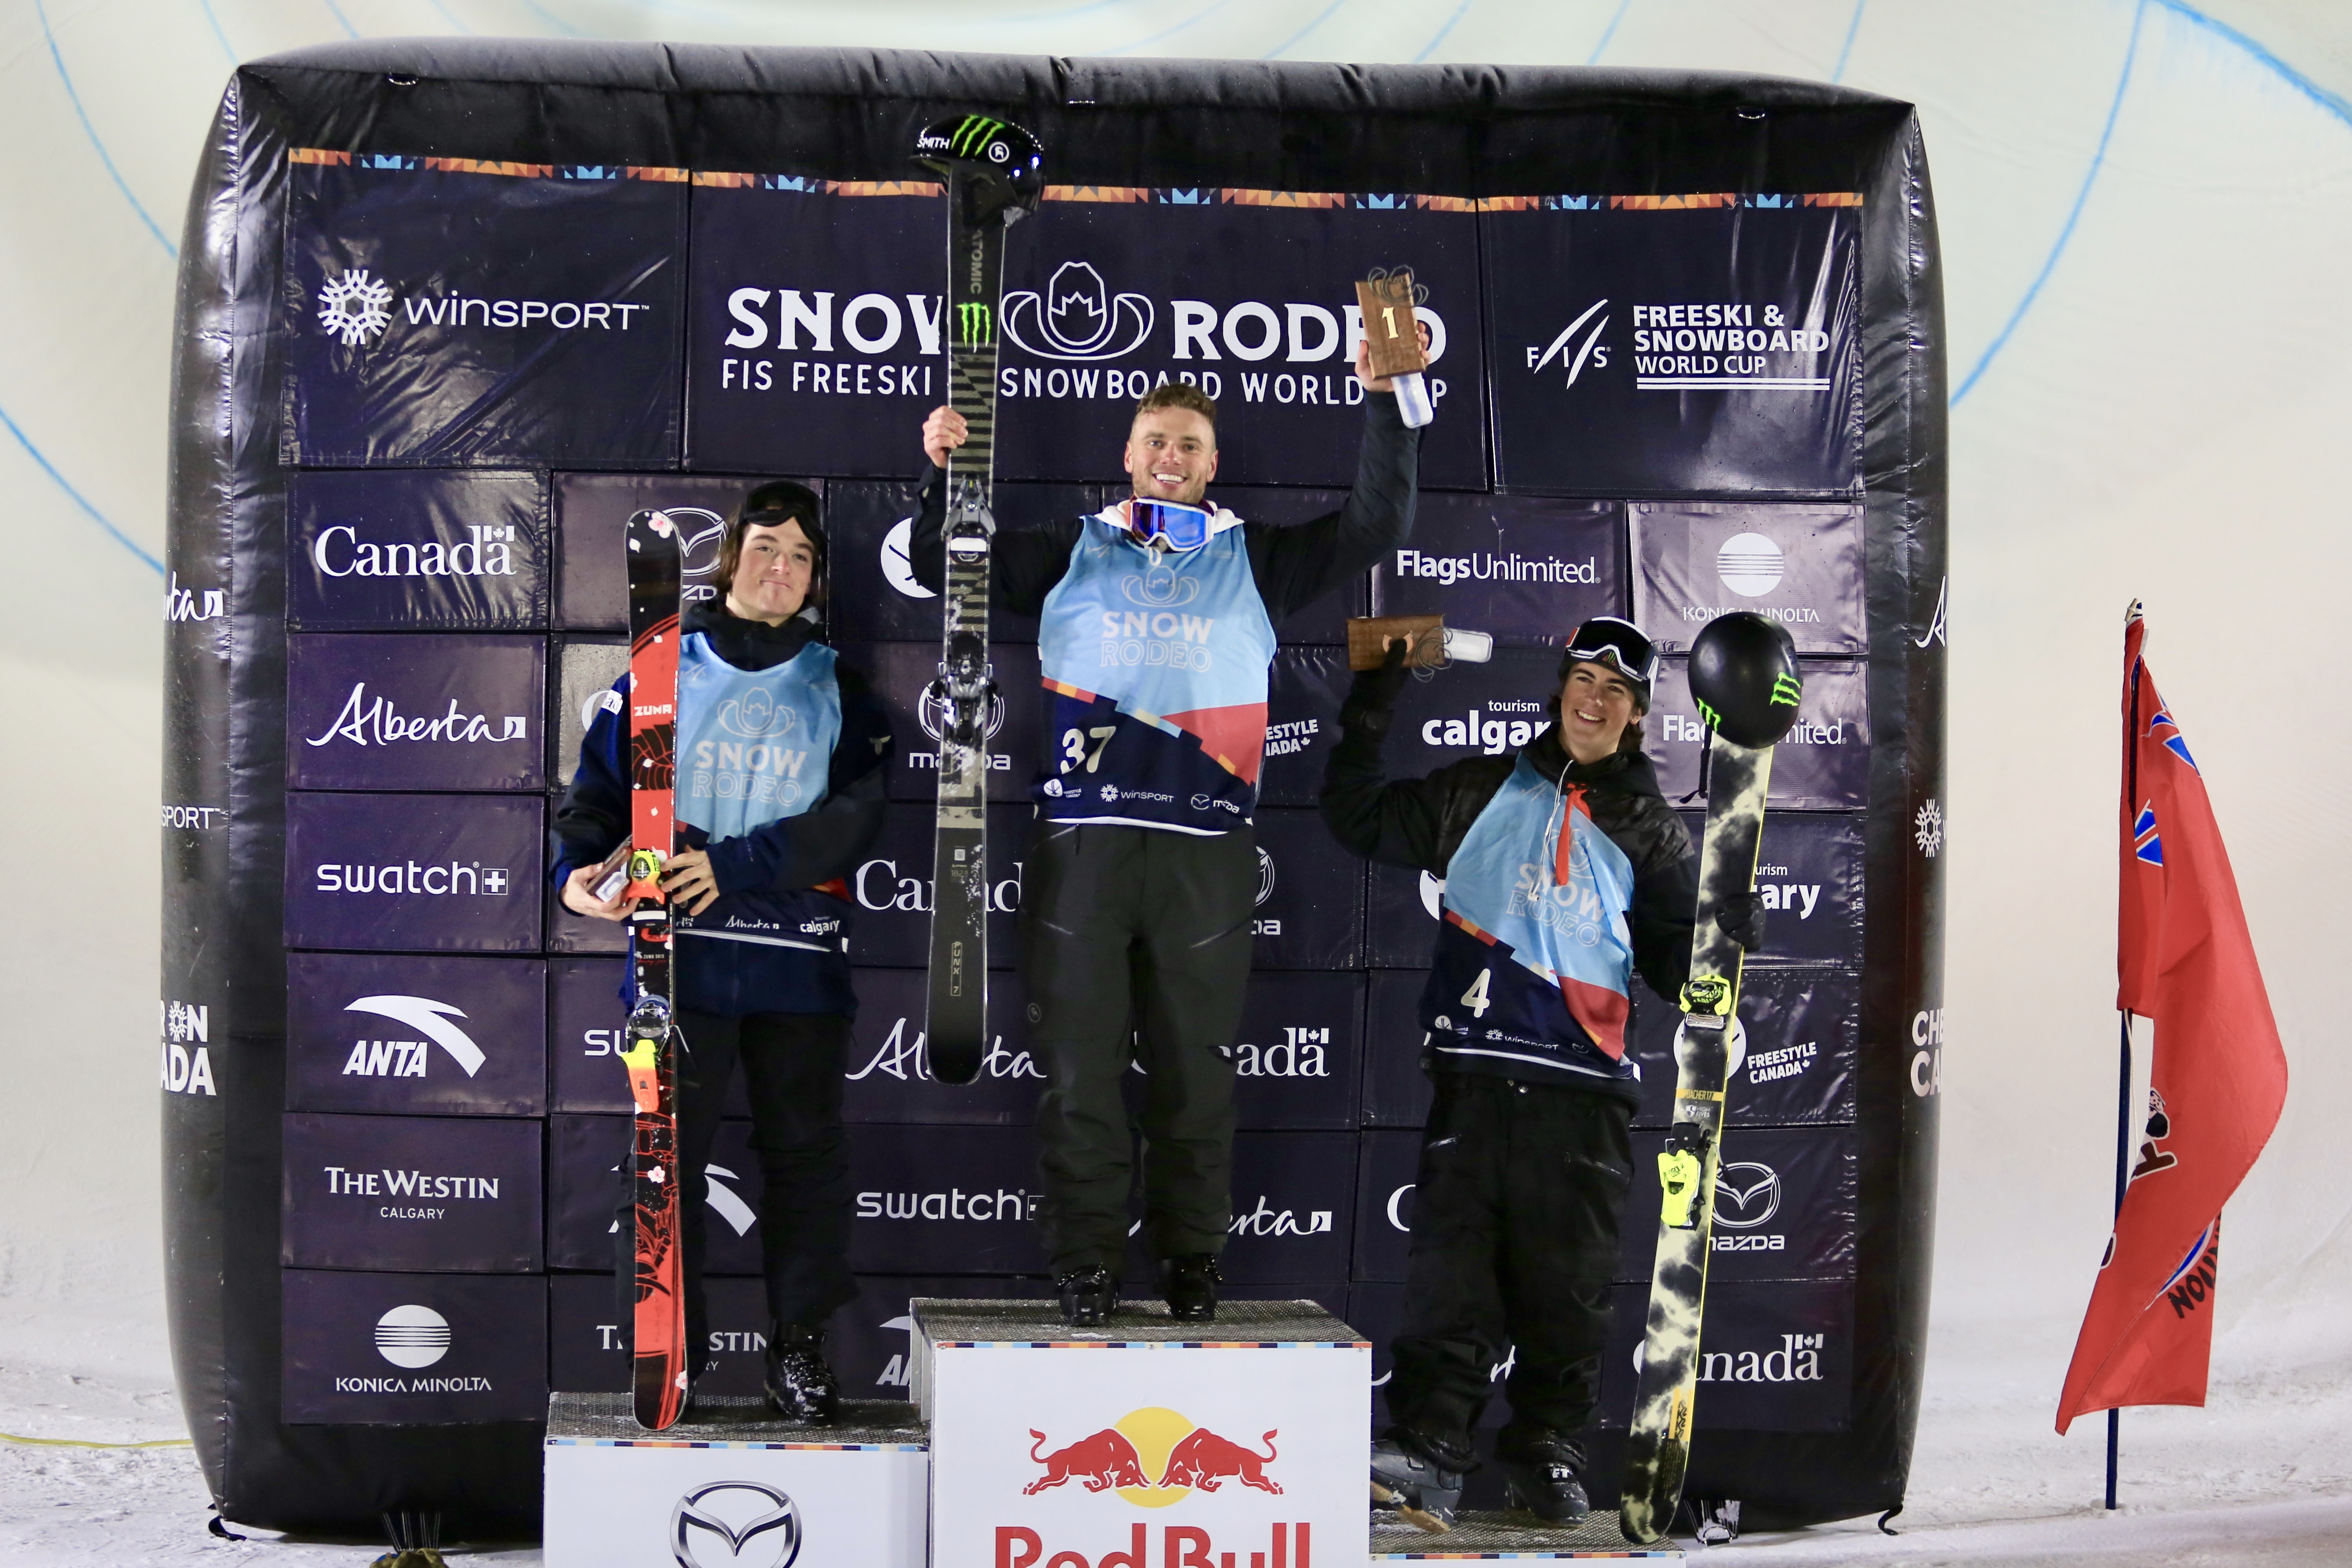 Gus Kenworthy in first place with Brendan Mackay in second and Birk Irving in Third.